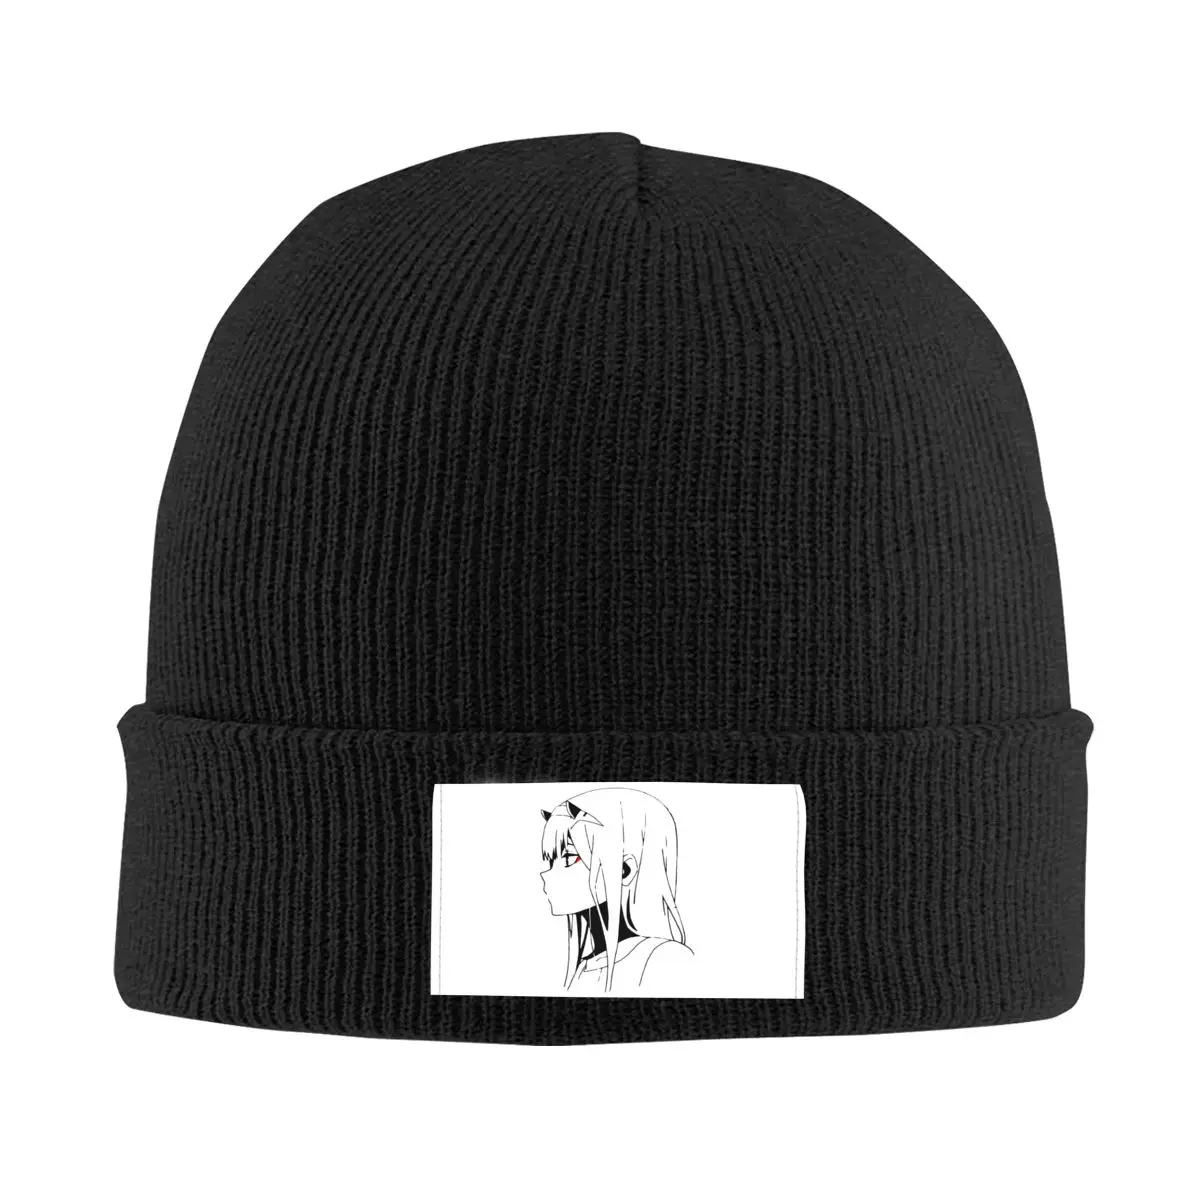 

Zero Two Darling In The Franxx Cool Movie T-Shirt Knitted Hat Beanie Autumn Winter Hat Warm Fashion Caps Men Women Gifts